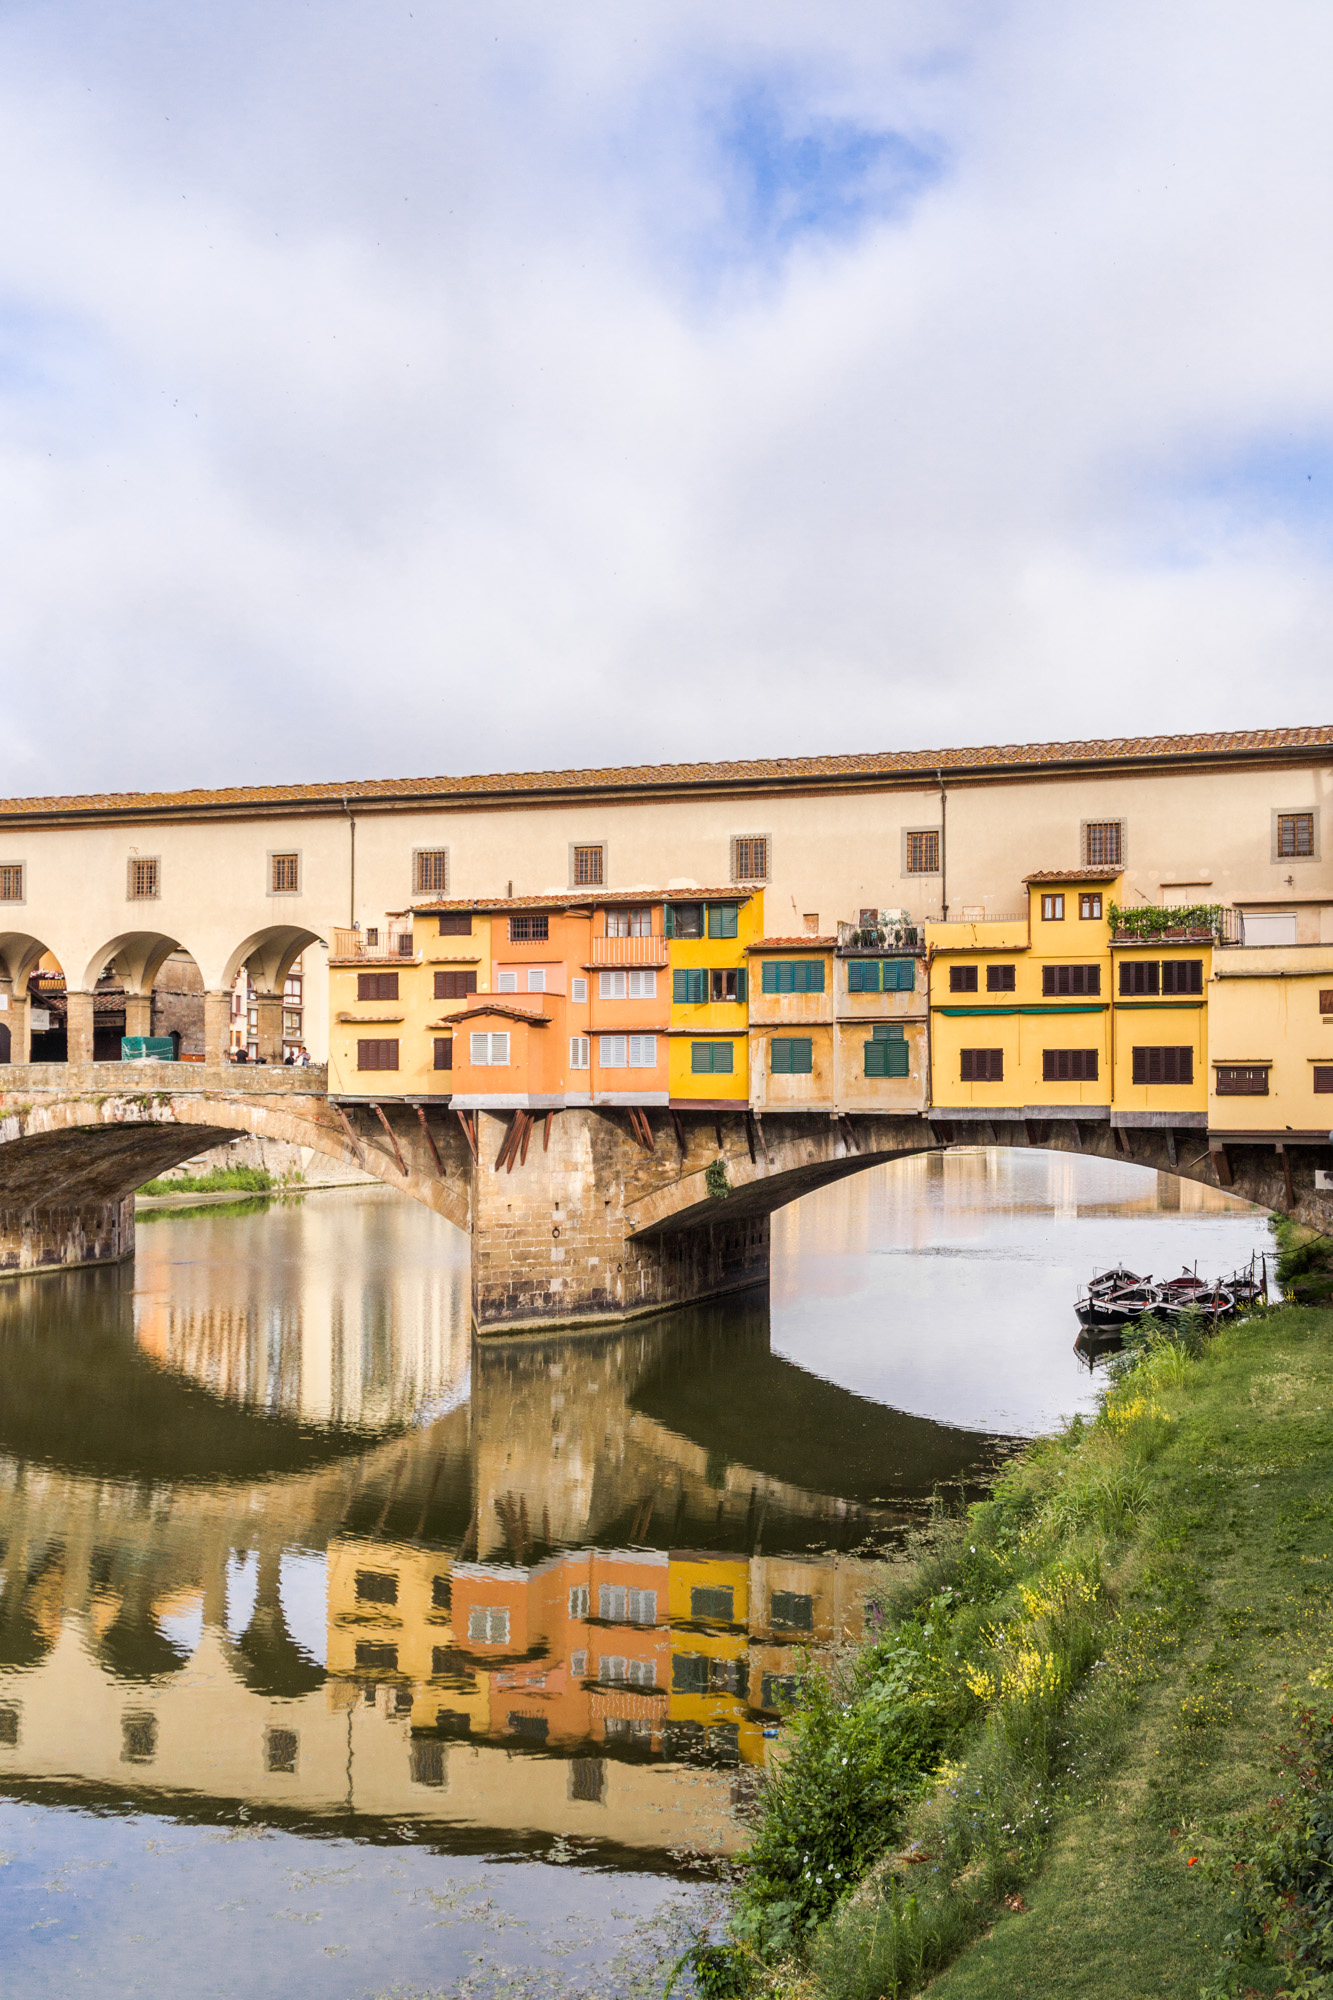 France/Italy roadtrip – Florence day 2